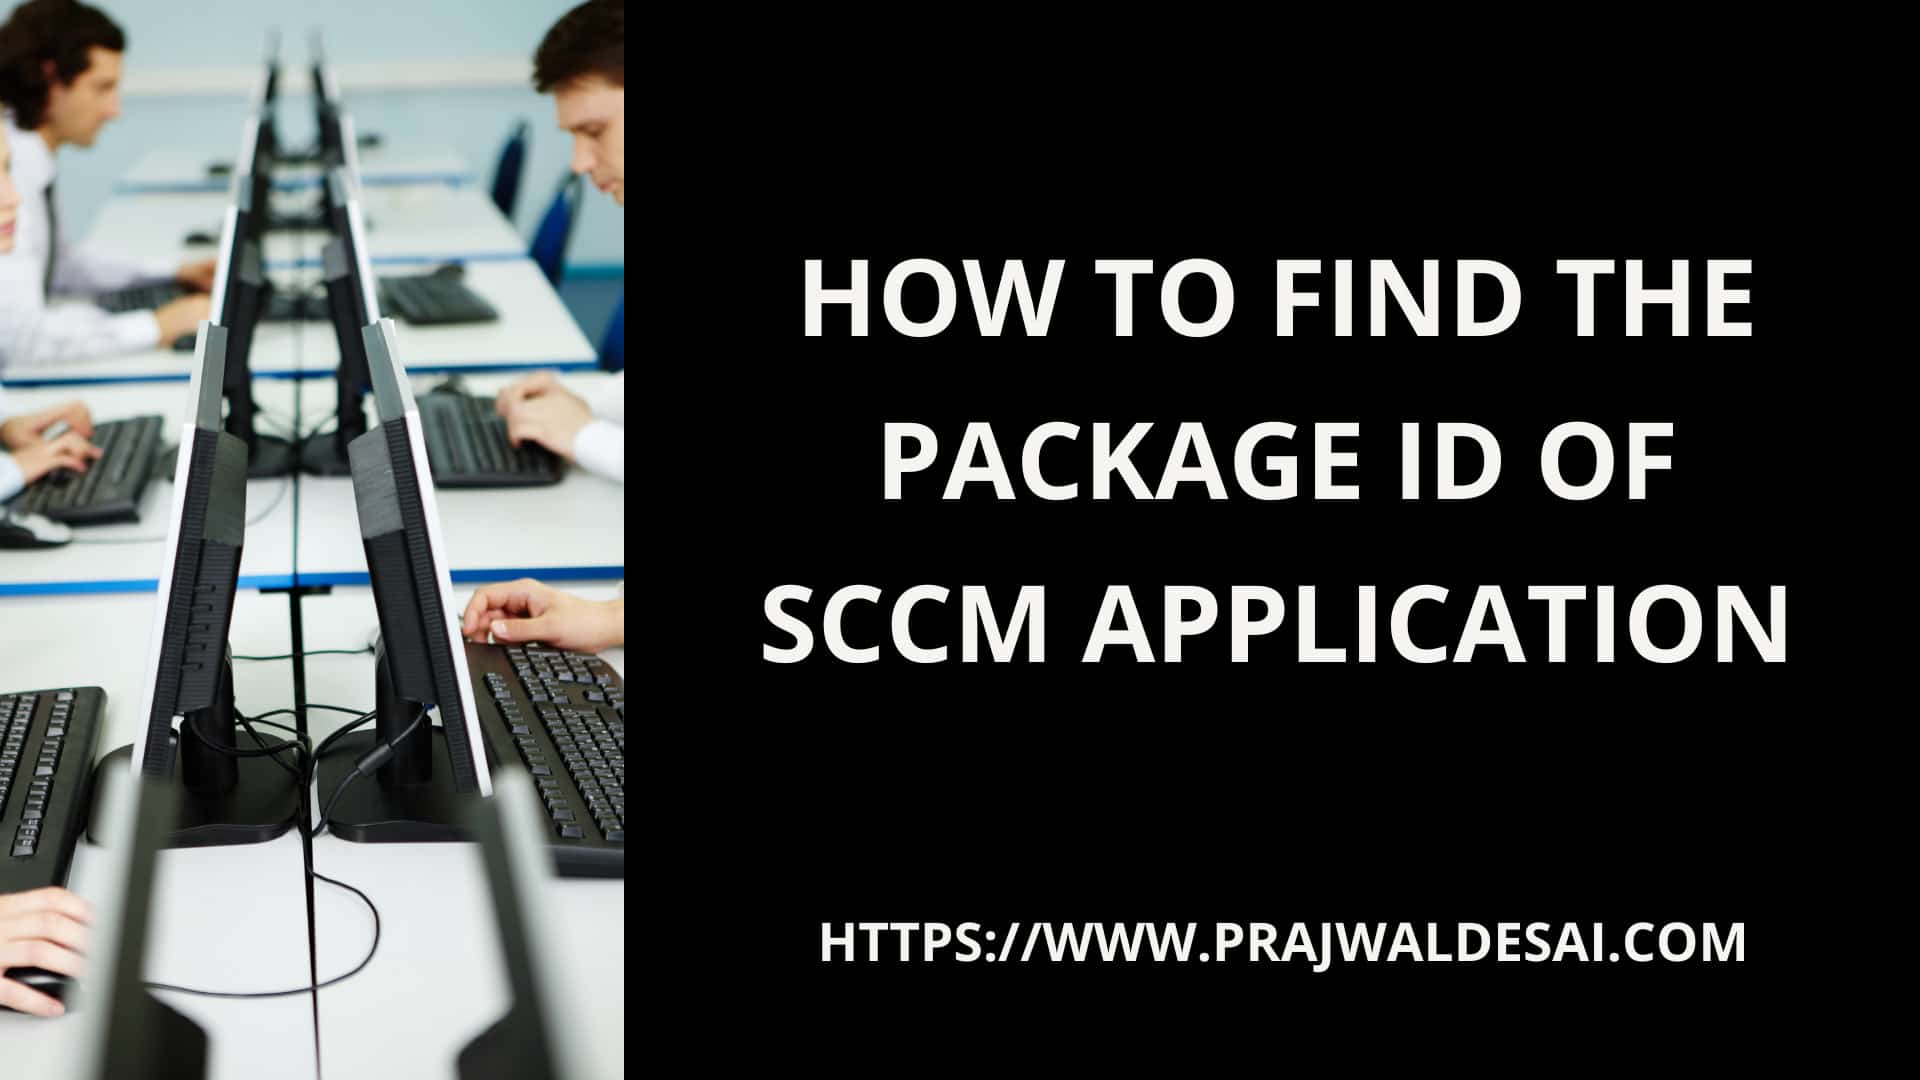 Find the Package ID of SCCM Application